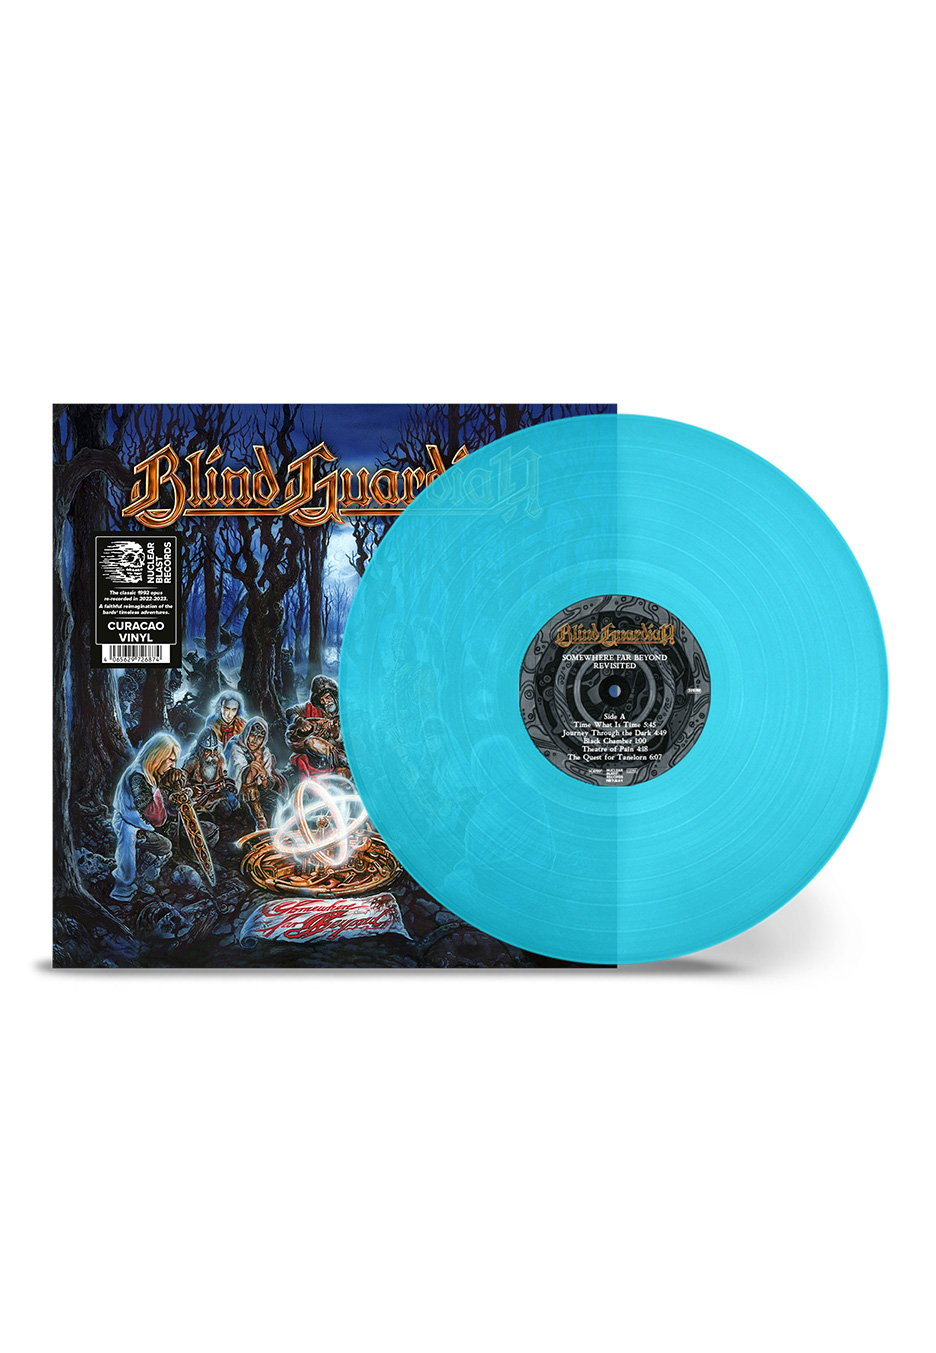 Blind Guardian - Somewhere Far Beyond Revisited Ltd. Curacao - Colored 2 Vinyl | Neutral-Image